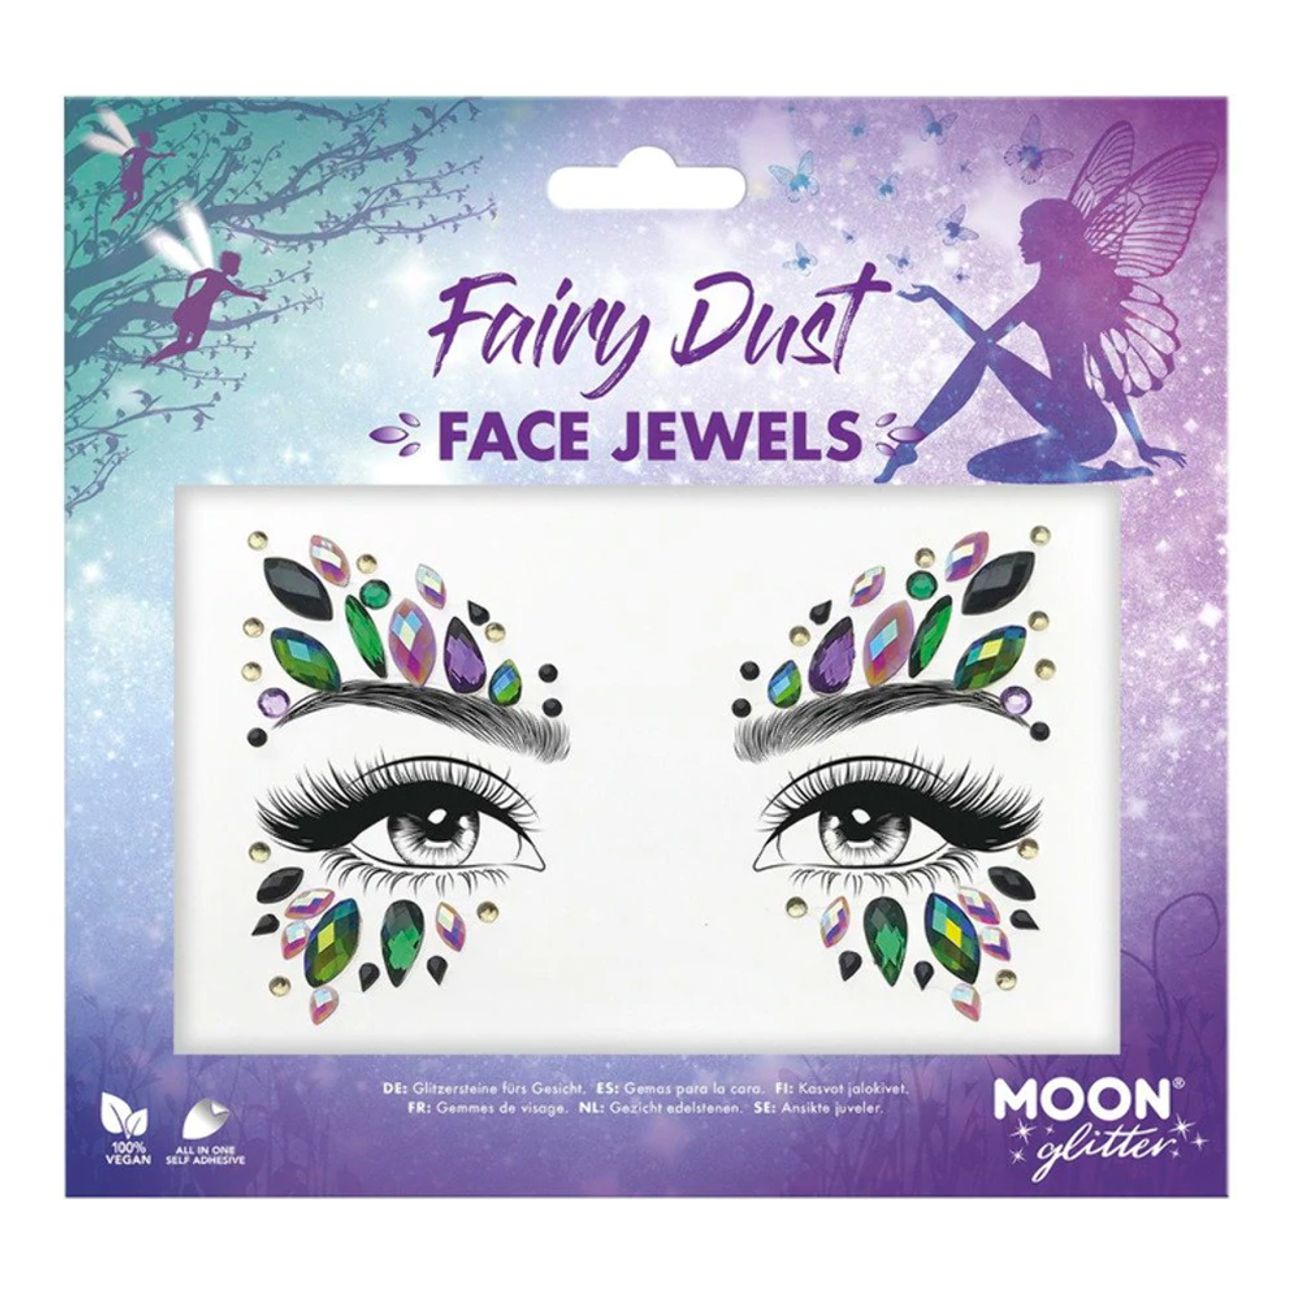 face-jewels-fairy-dust-84448-1